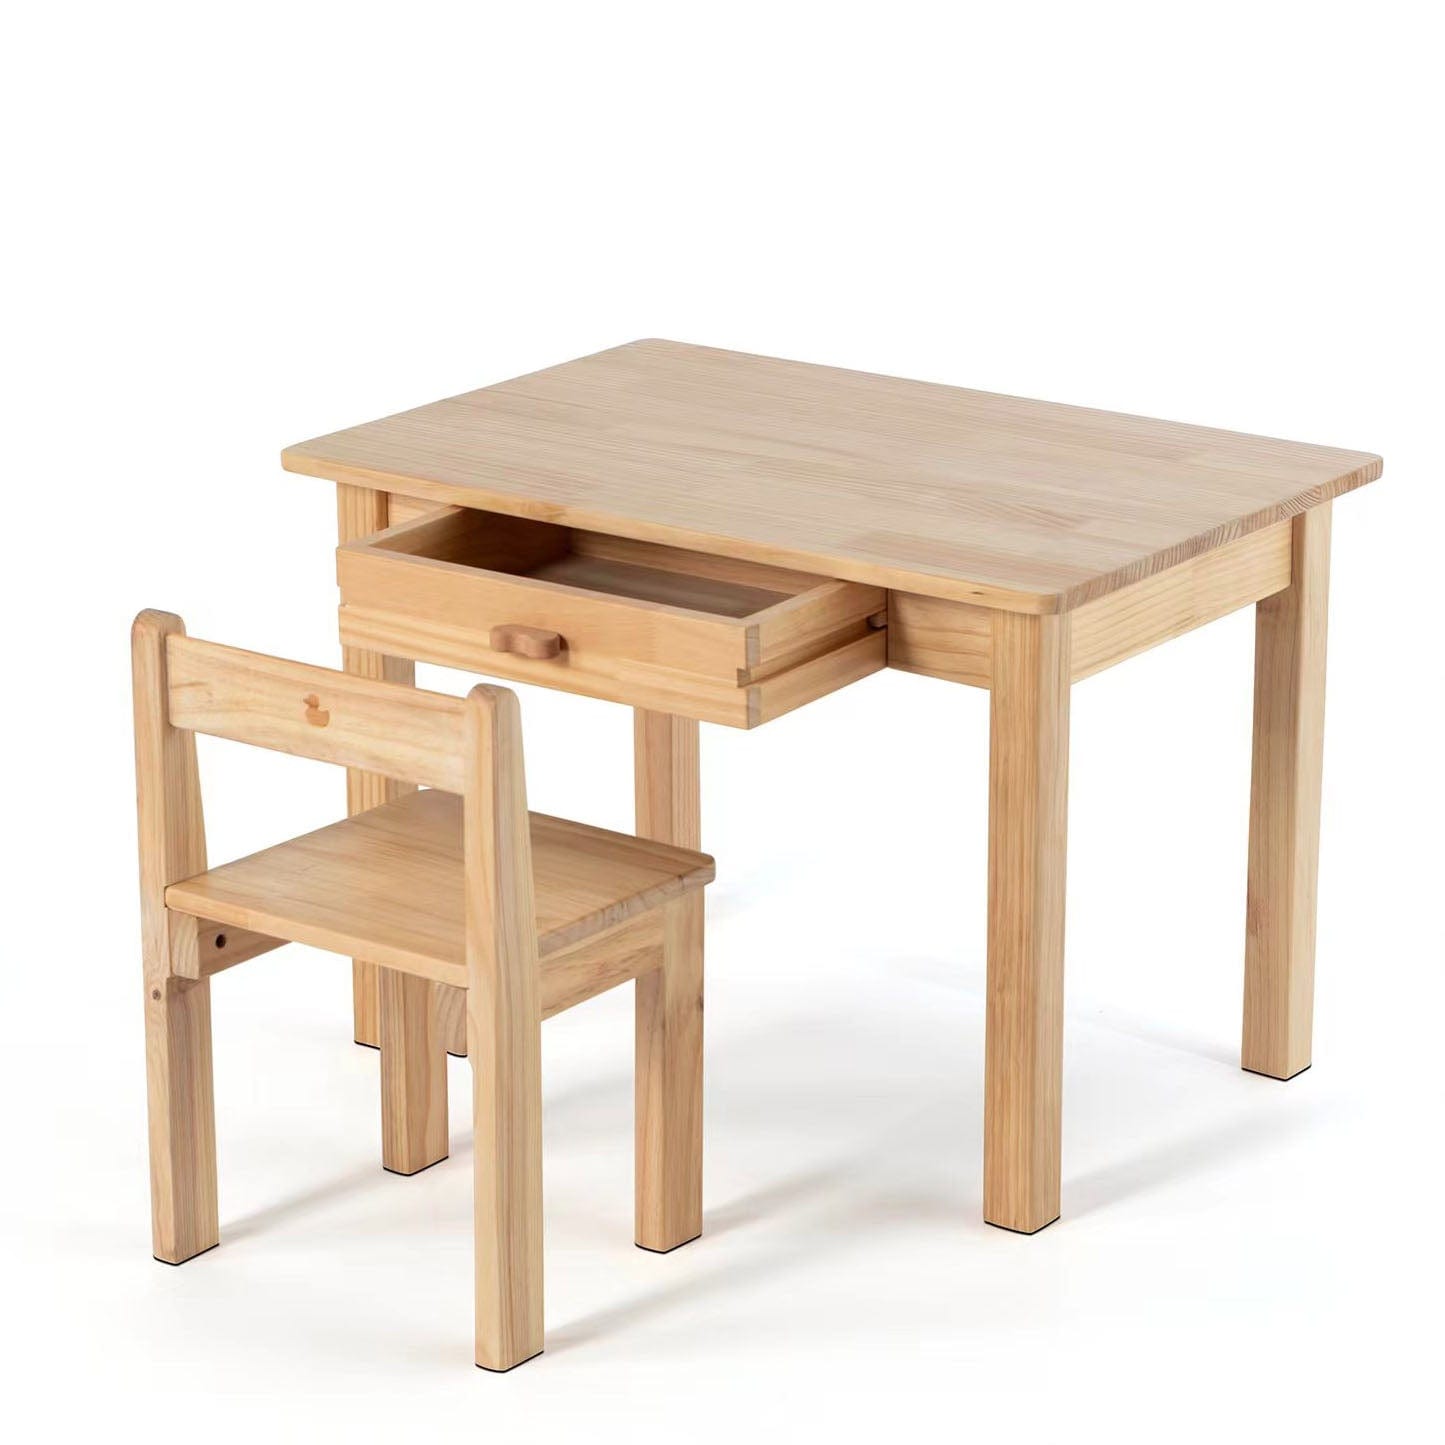 Table & Chair Set My Duckling Kids Solid Wood Study Table and Chair Set - 2022 New Release DK-02100